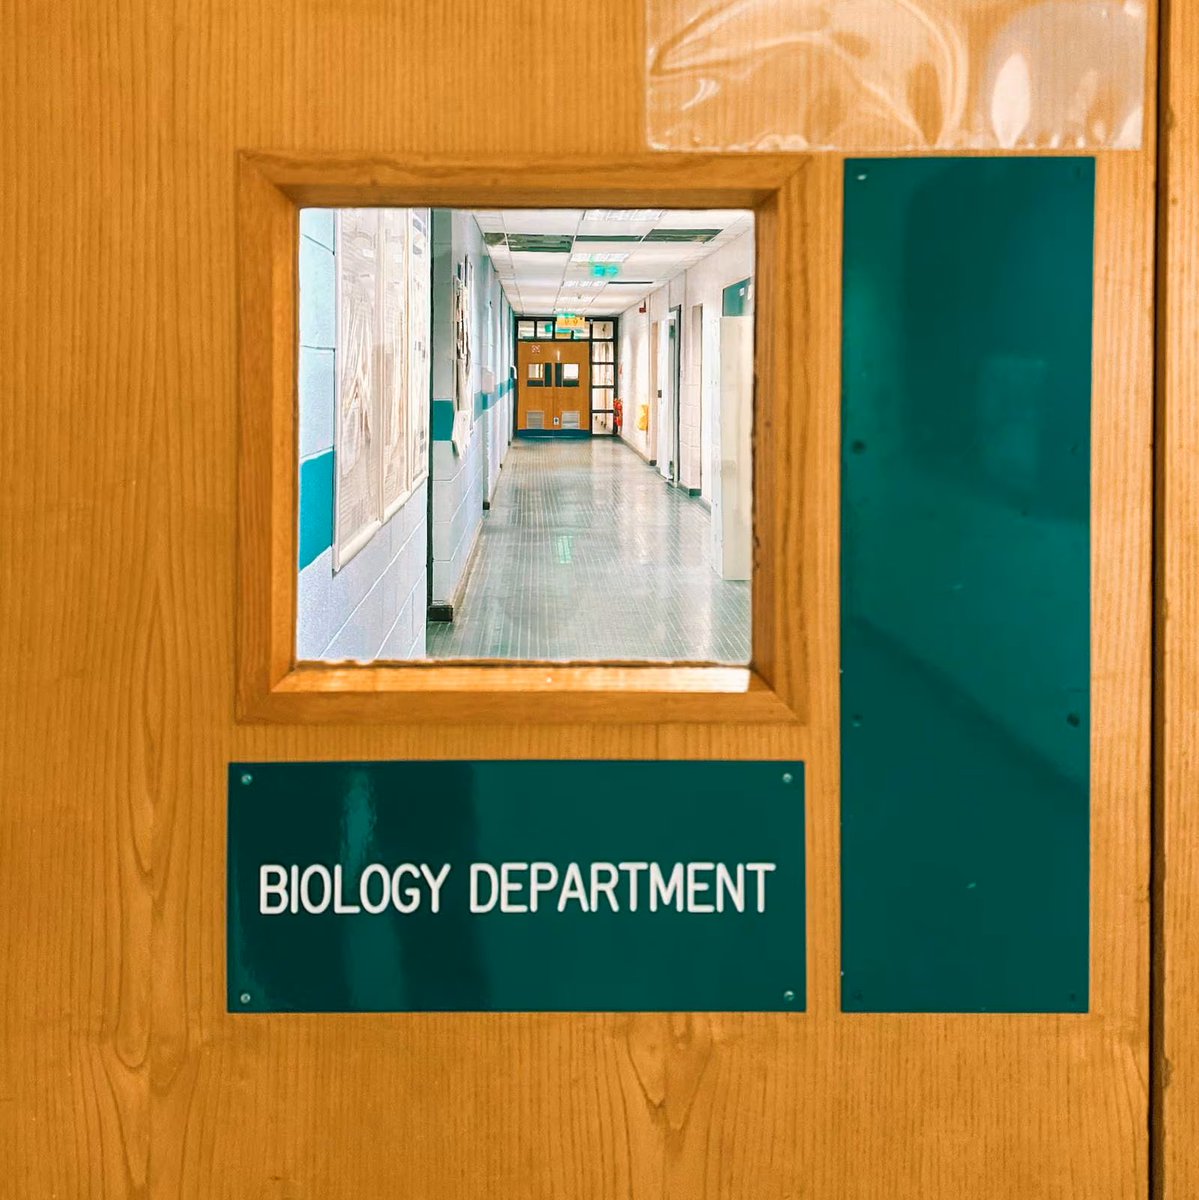 David Maguire, who works as an IT administrator in MU, had his photo of the Biology Dept featured in the travelling Accidentally Wes Anderson exhibition.🔬 irishtimes.com/culture/film/2… 📸Do you have a potential Accidentally Wes Anderson pic of MU? Tag us and we'll share!